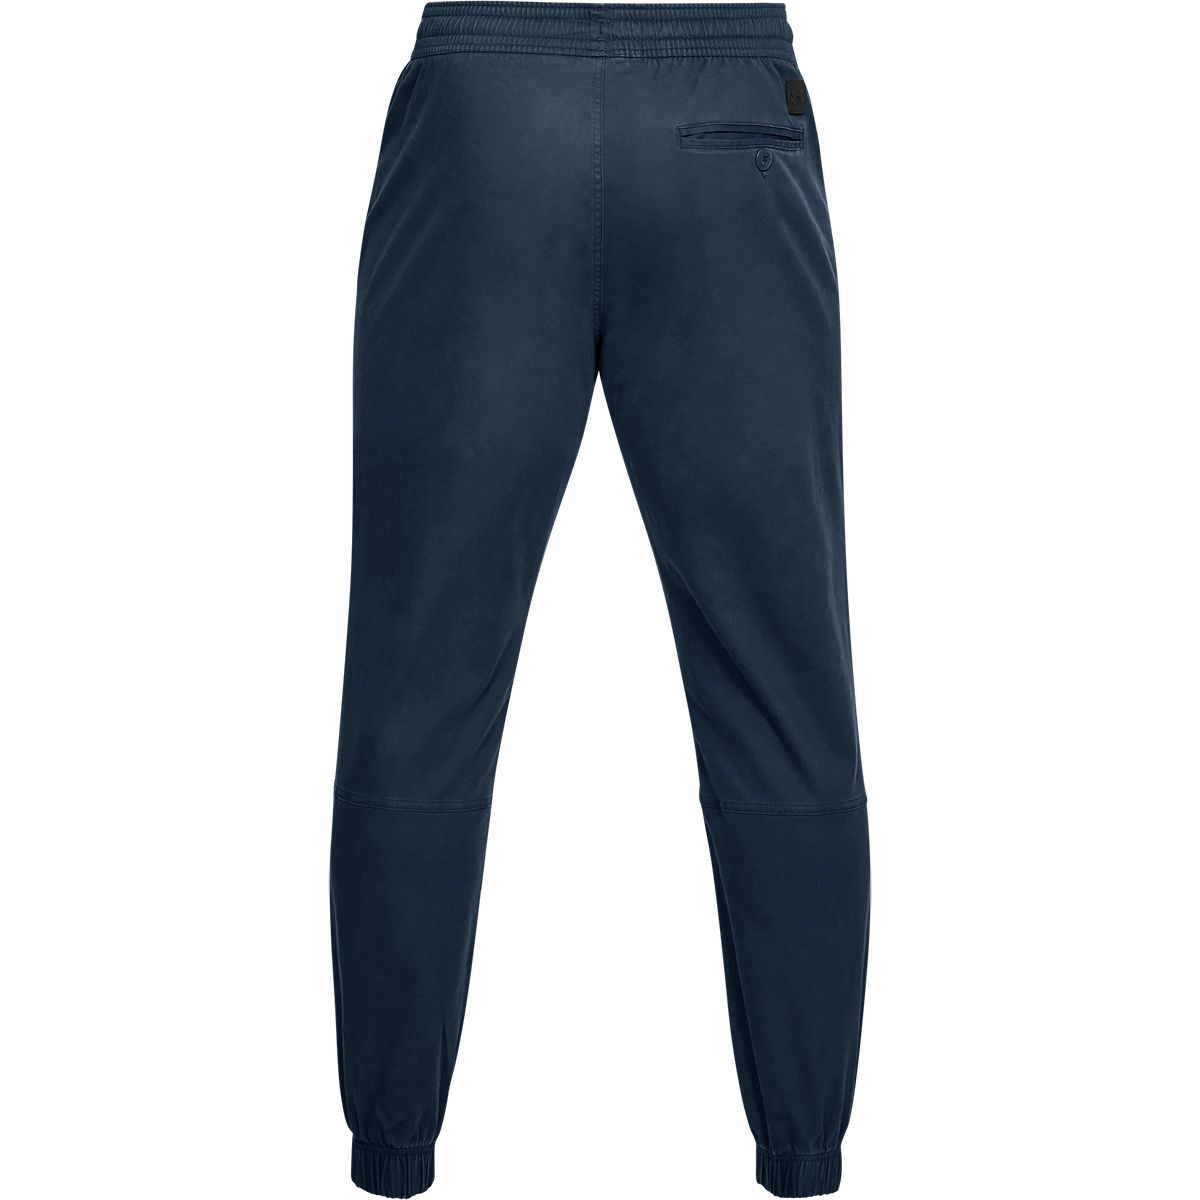 Under Armour Men's Ua Performance Chino Joggers for Men